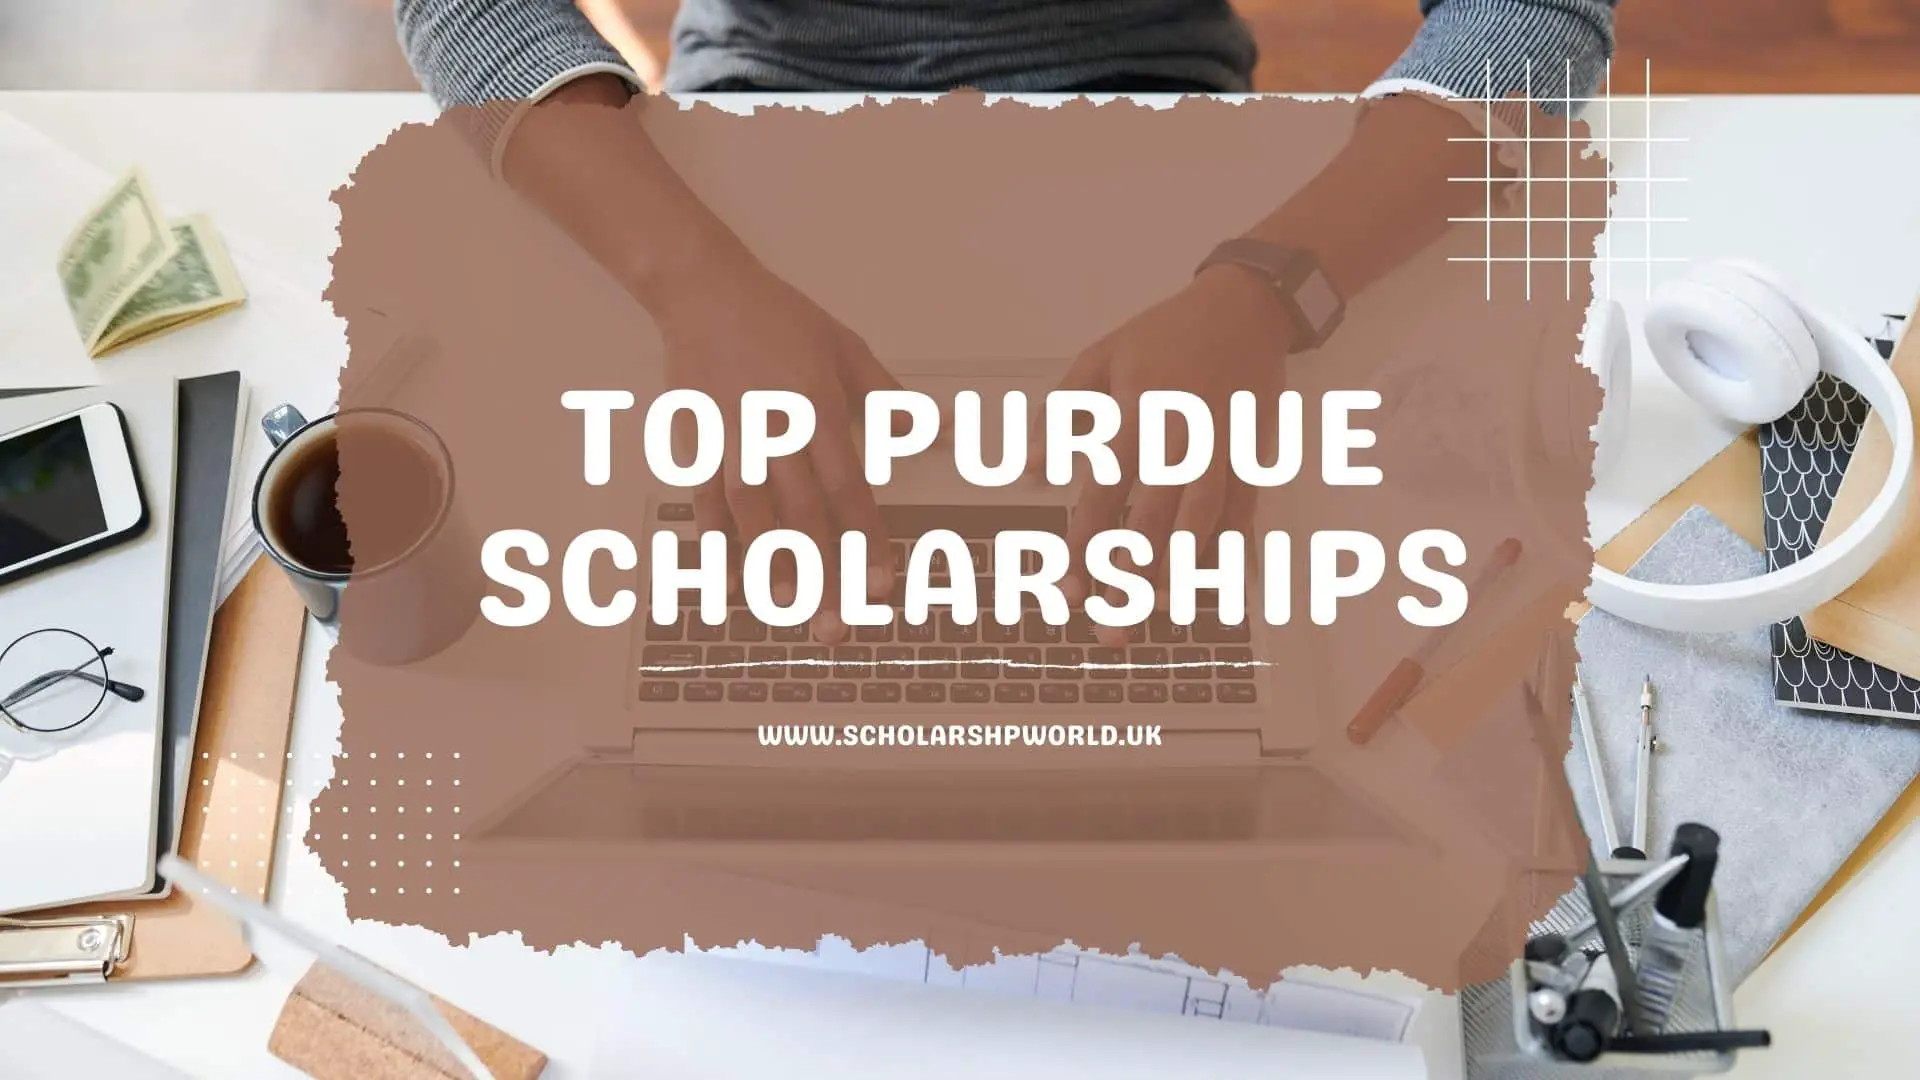 Apply: Top Purdue Scholarships To Apply For In 2022